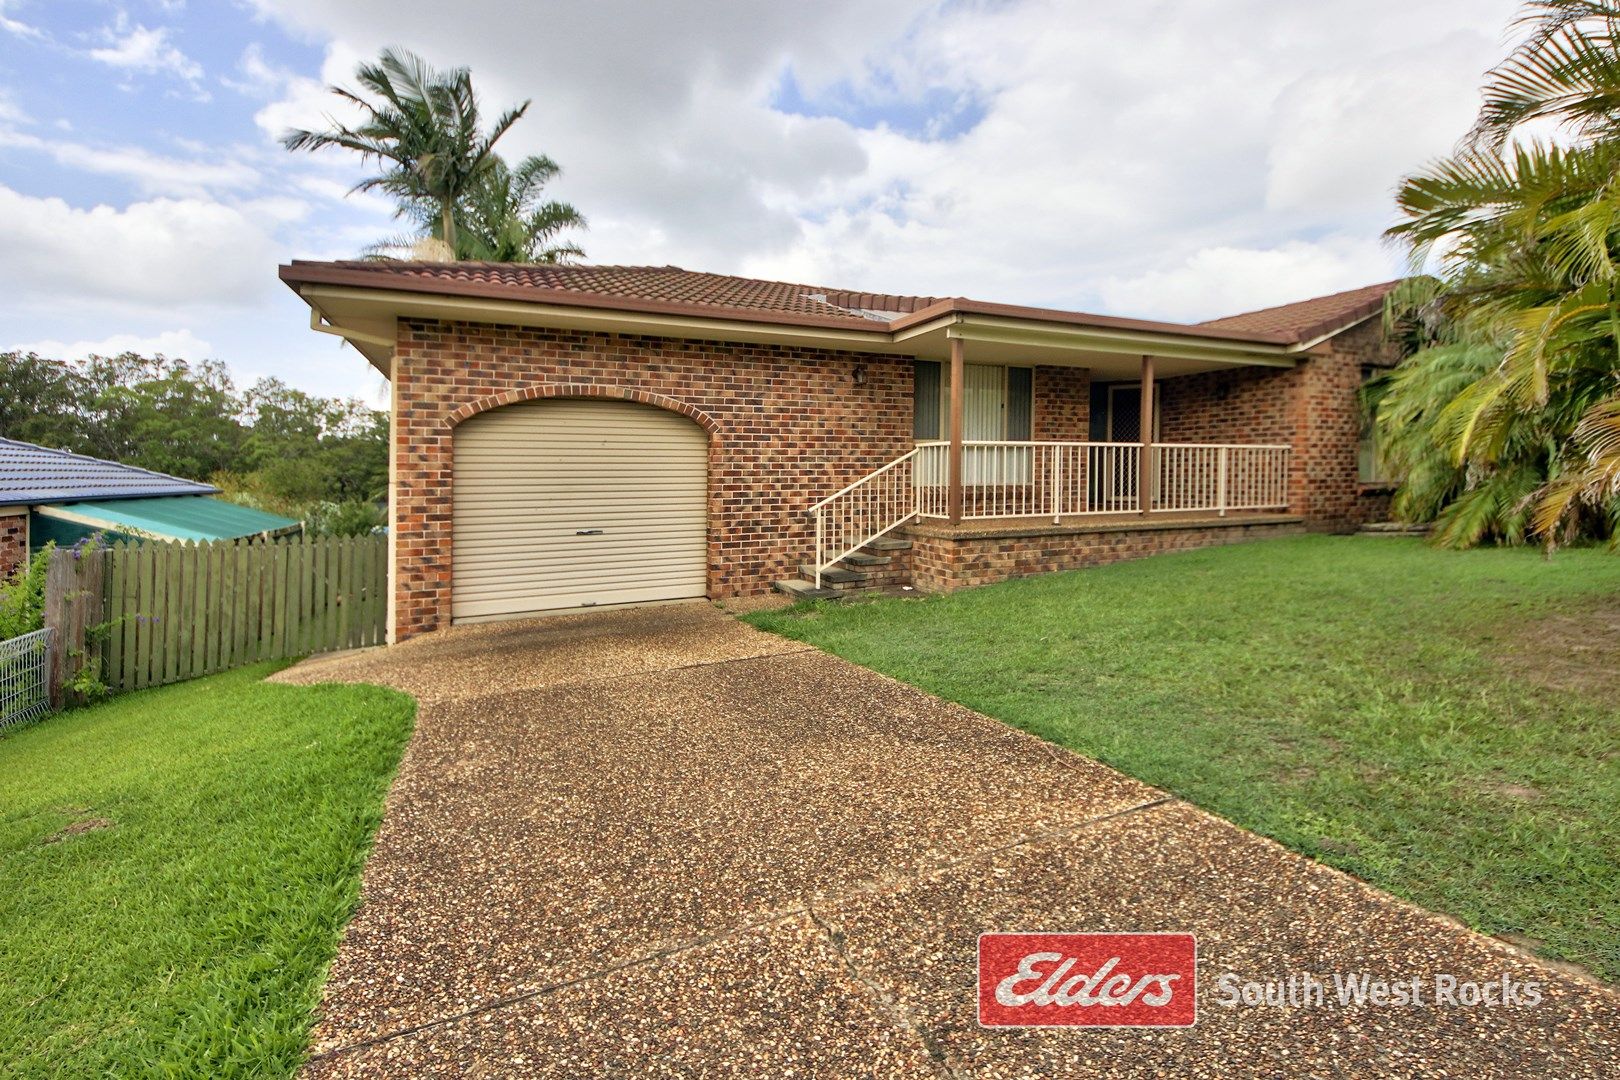 6 Dolphin Crescent, South West Rocks NSW 2431, Image 0